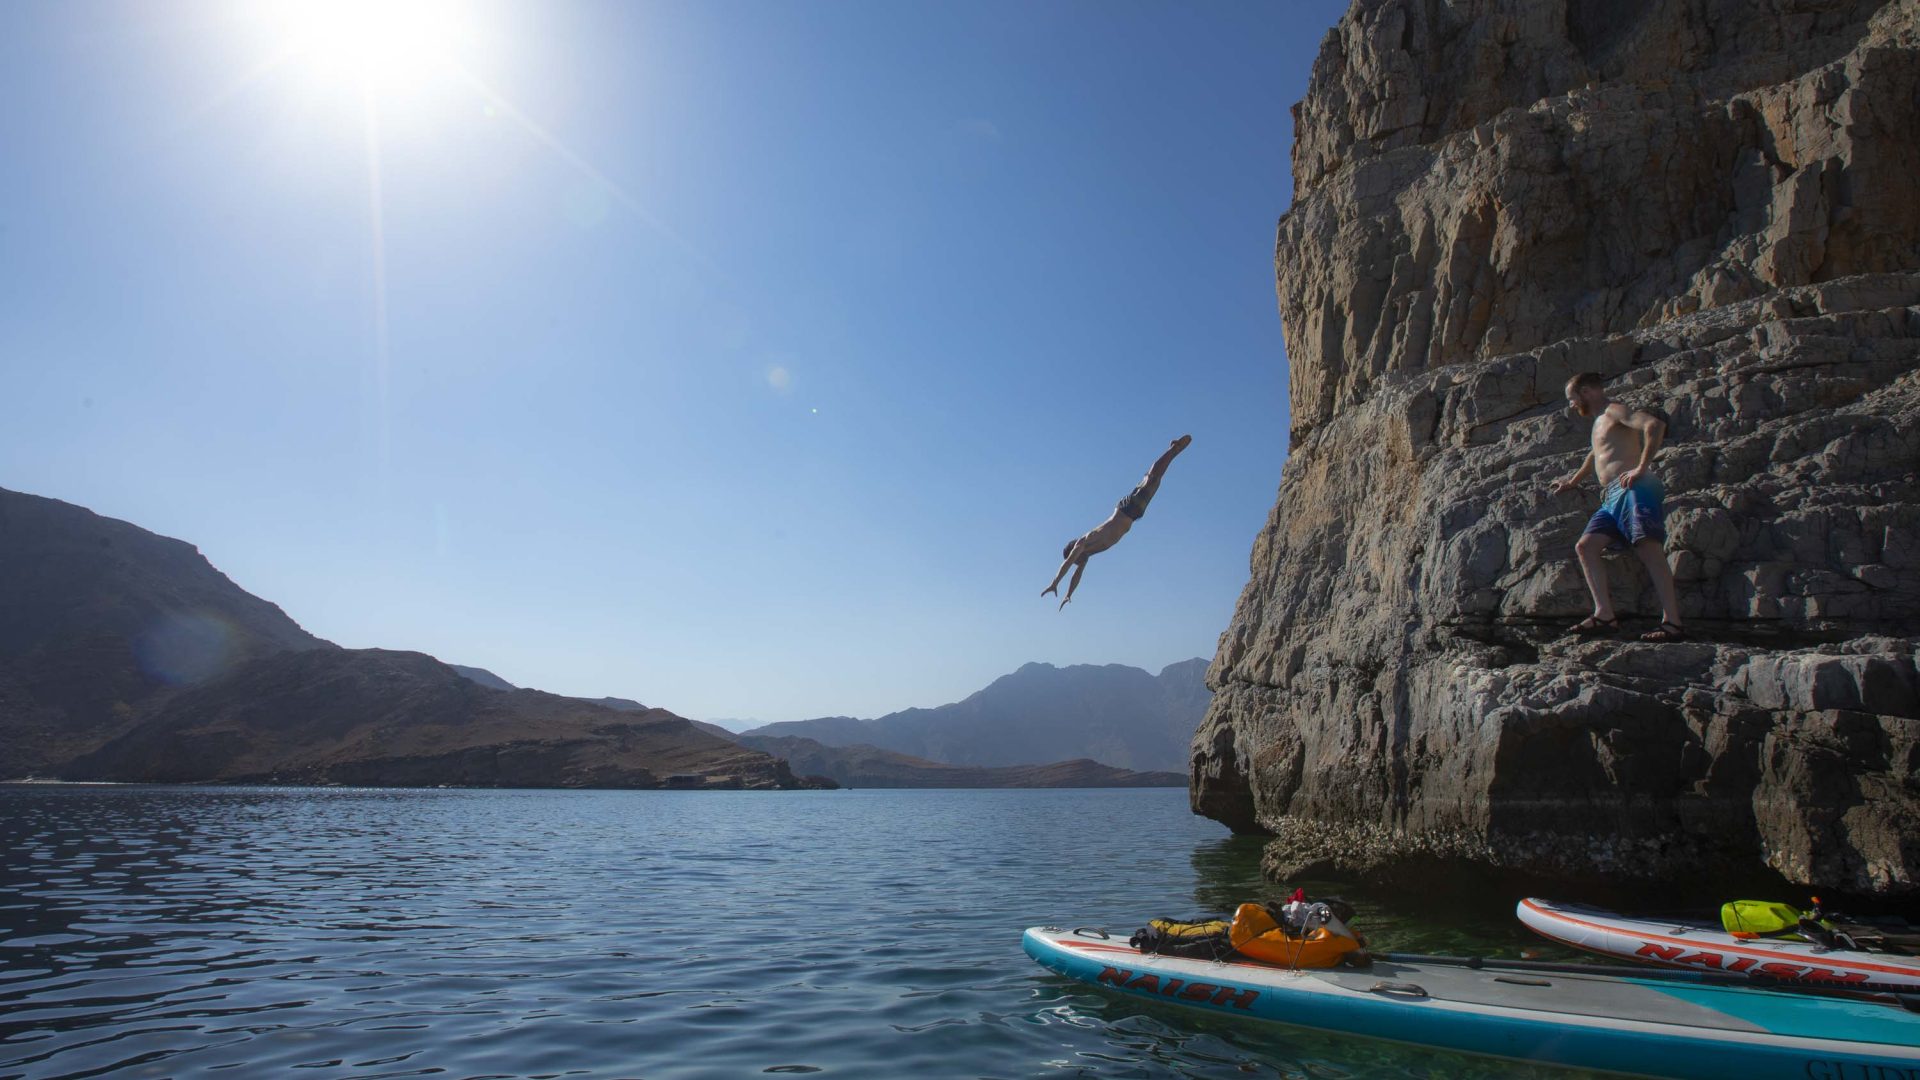 A person jumps from a rock face while paddle boards are seen below in the foreground.